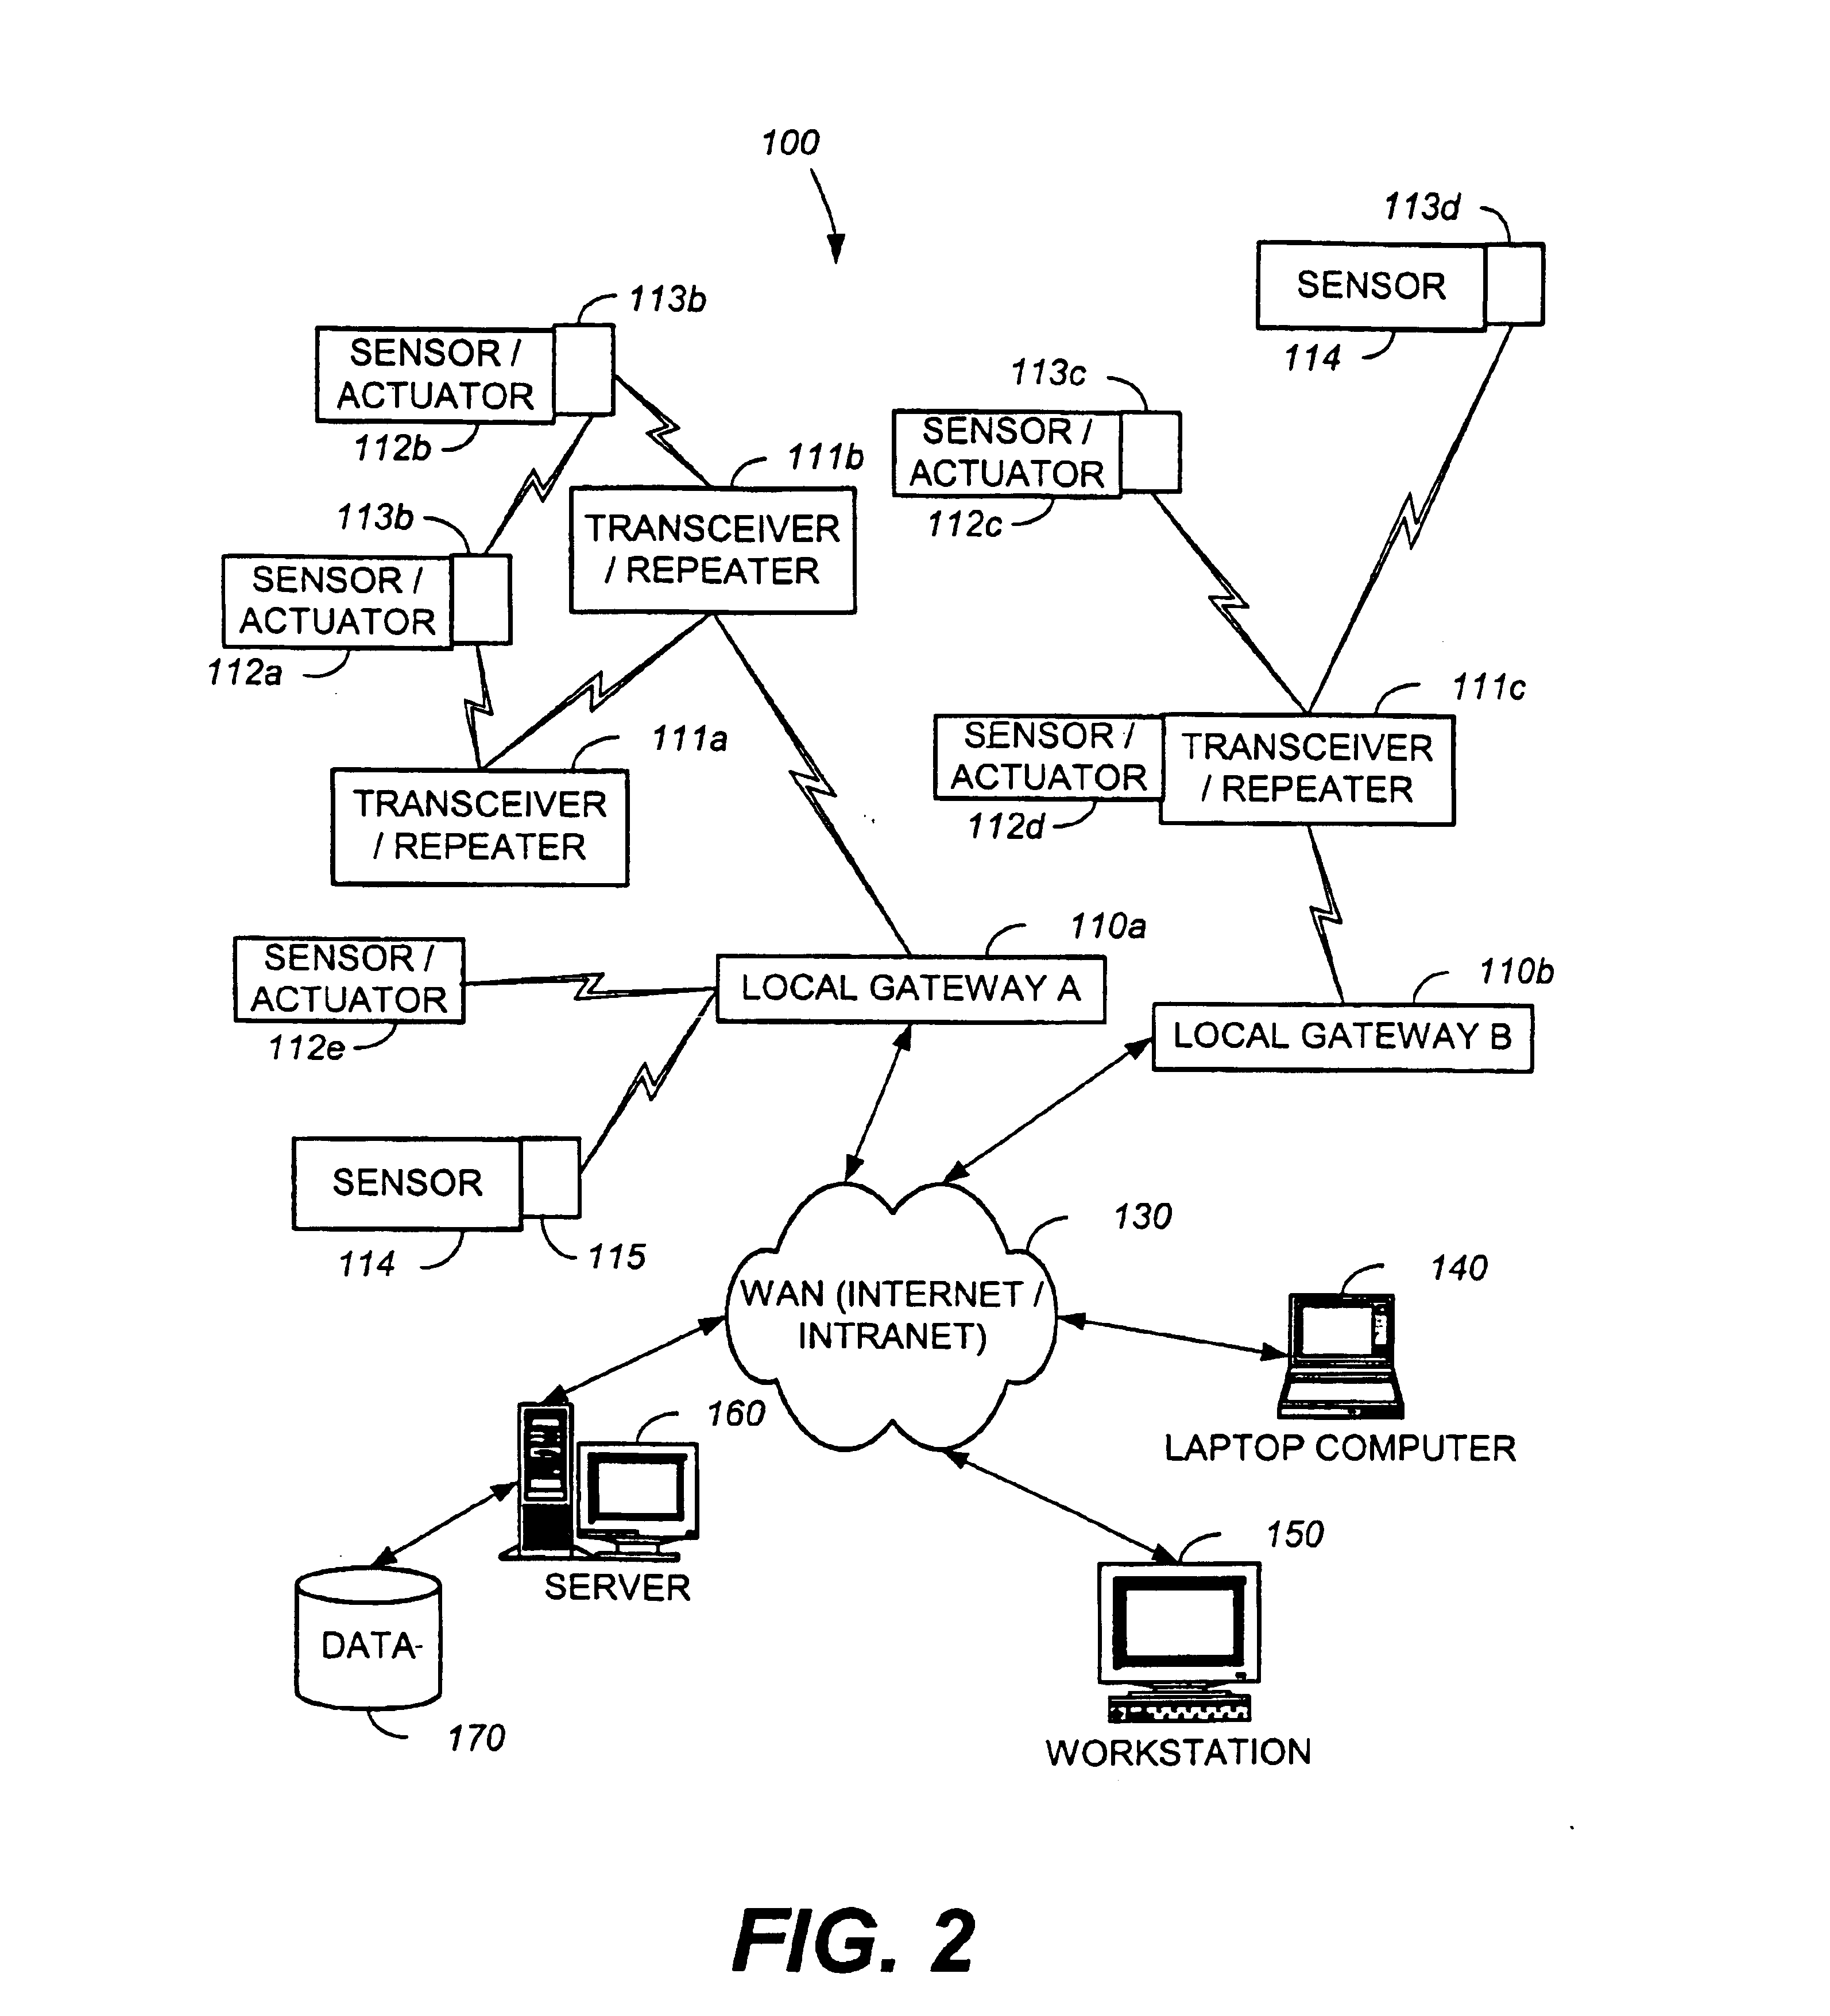 System and method for monitoring and controlling residential devices